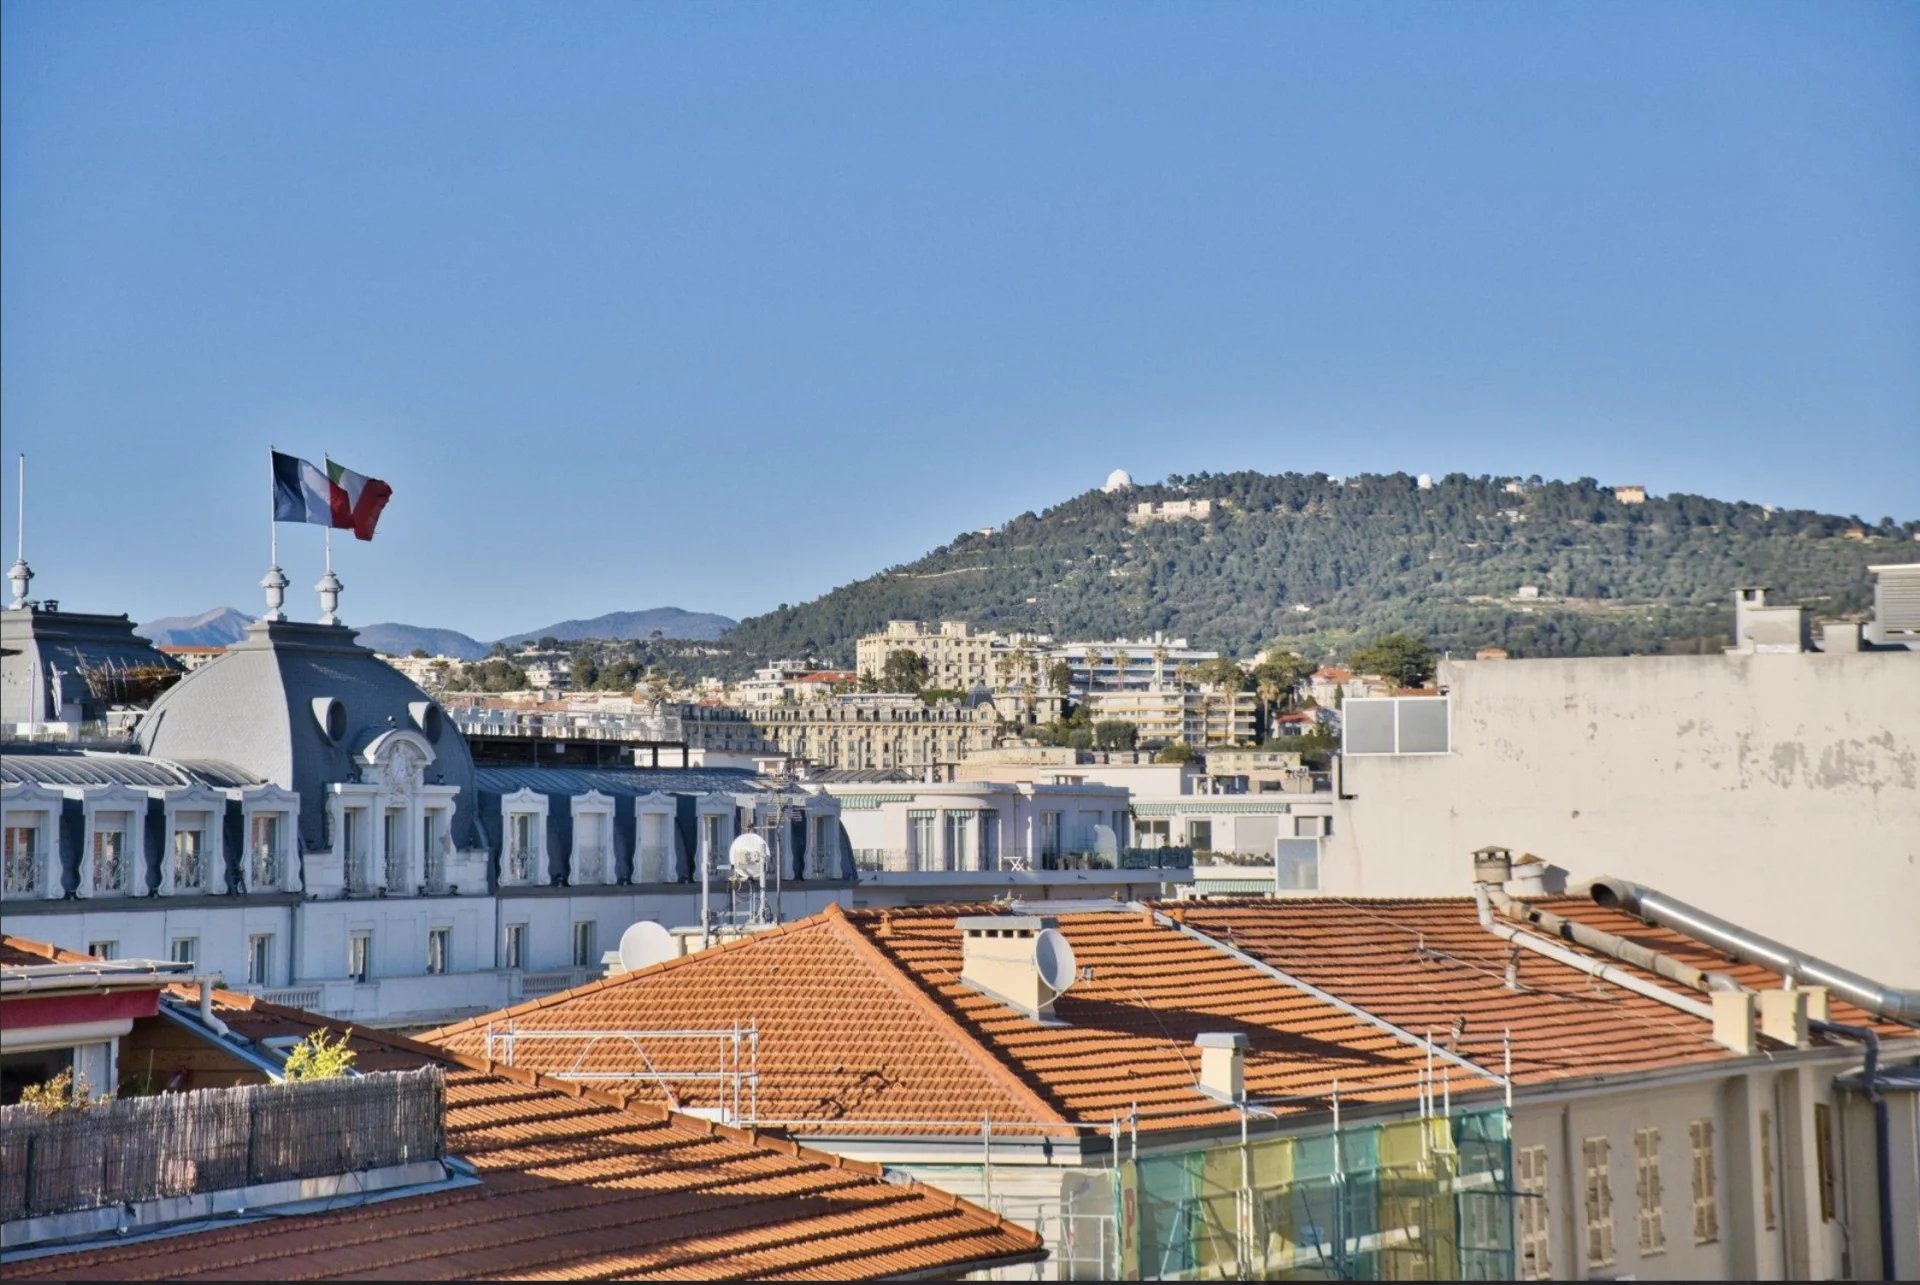 Newly renovated 55 M2 apartment in Carré d'Or